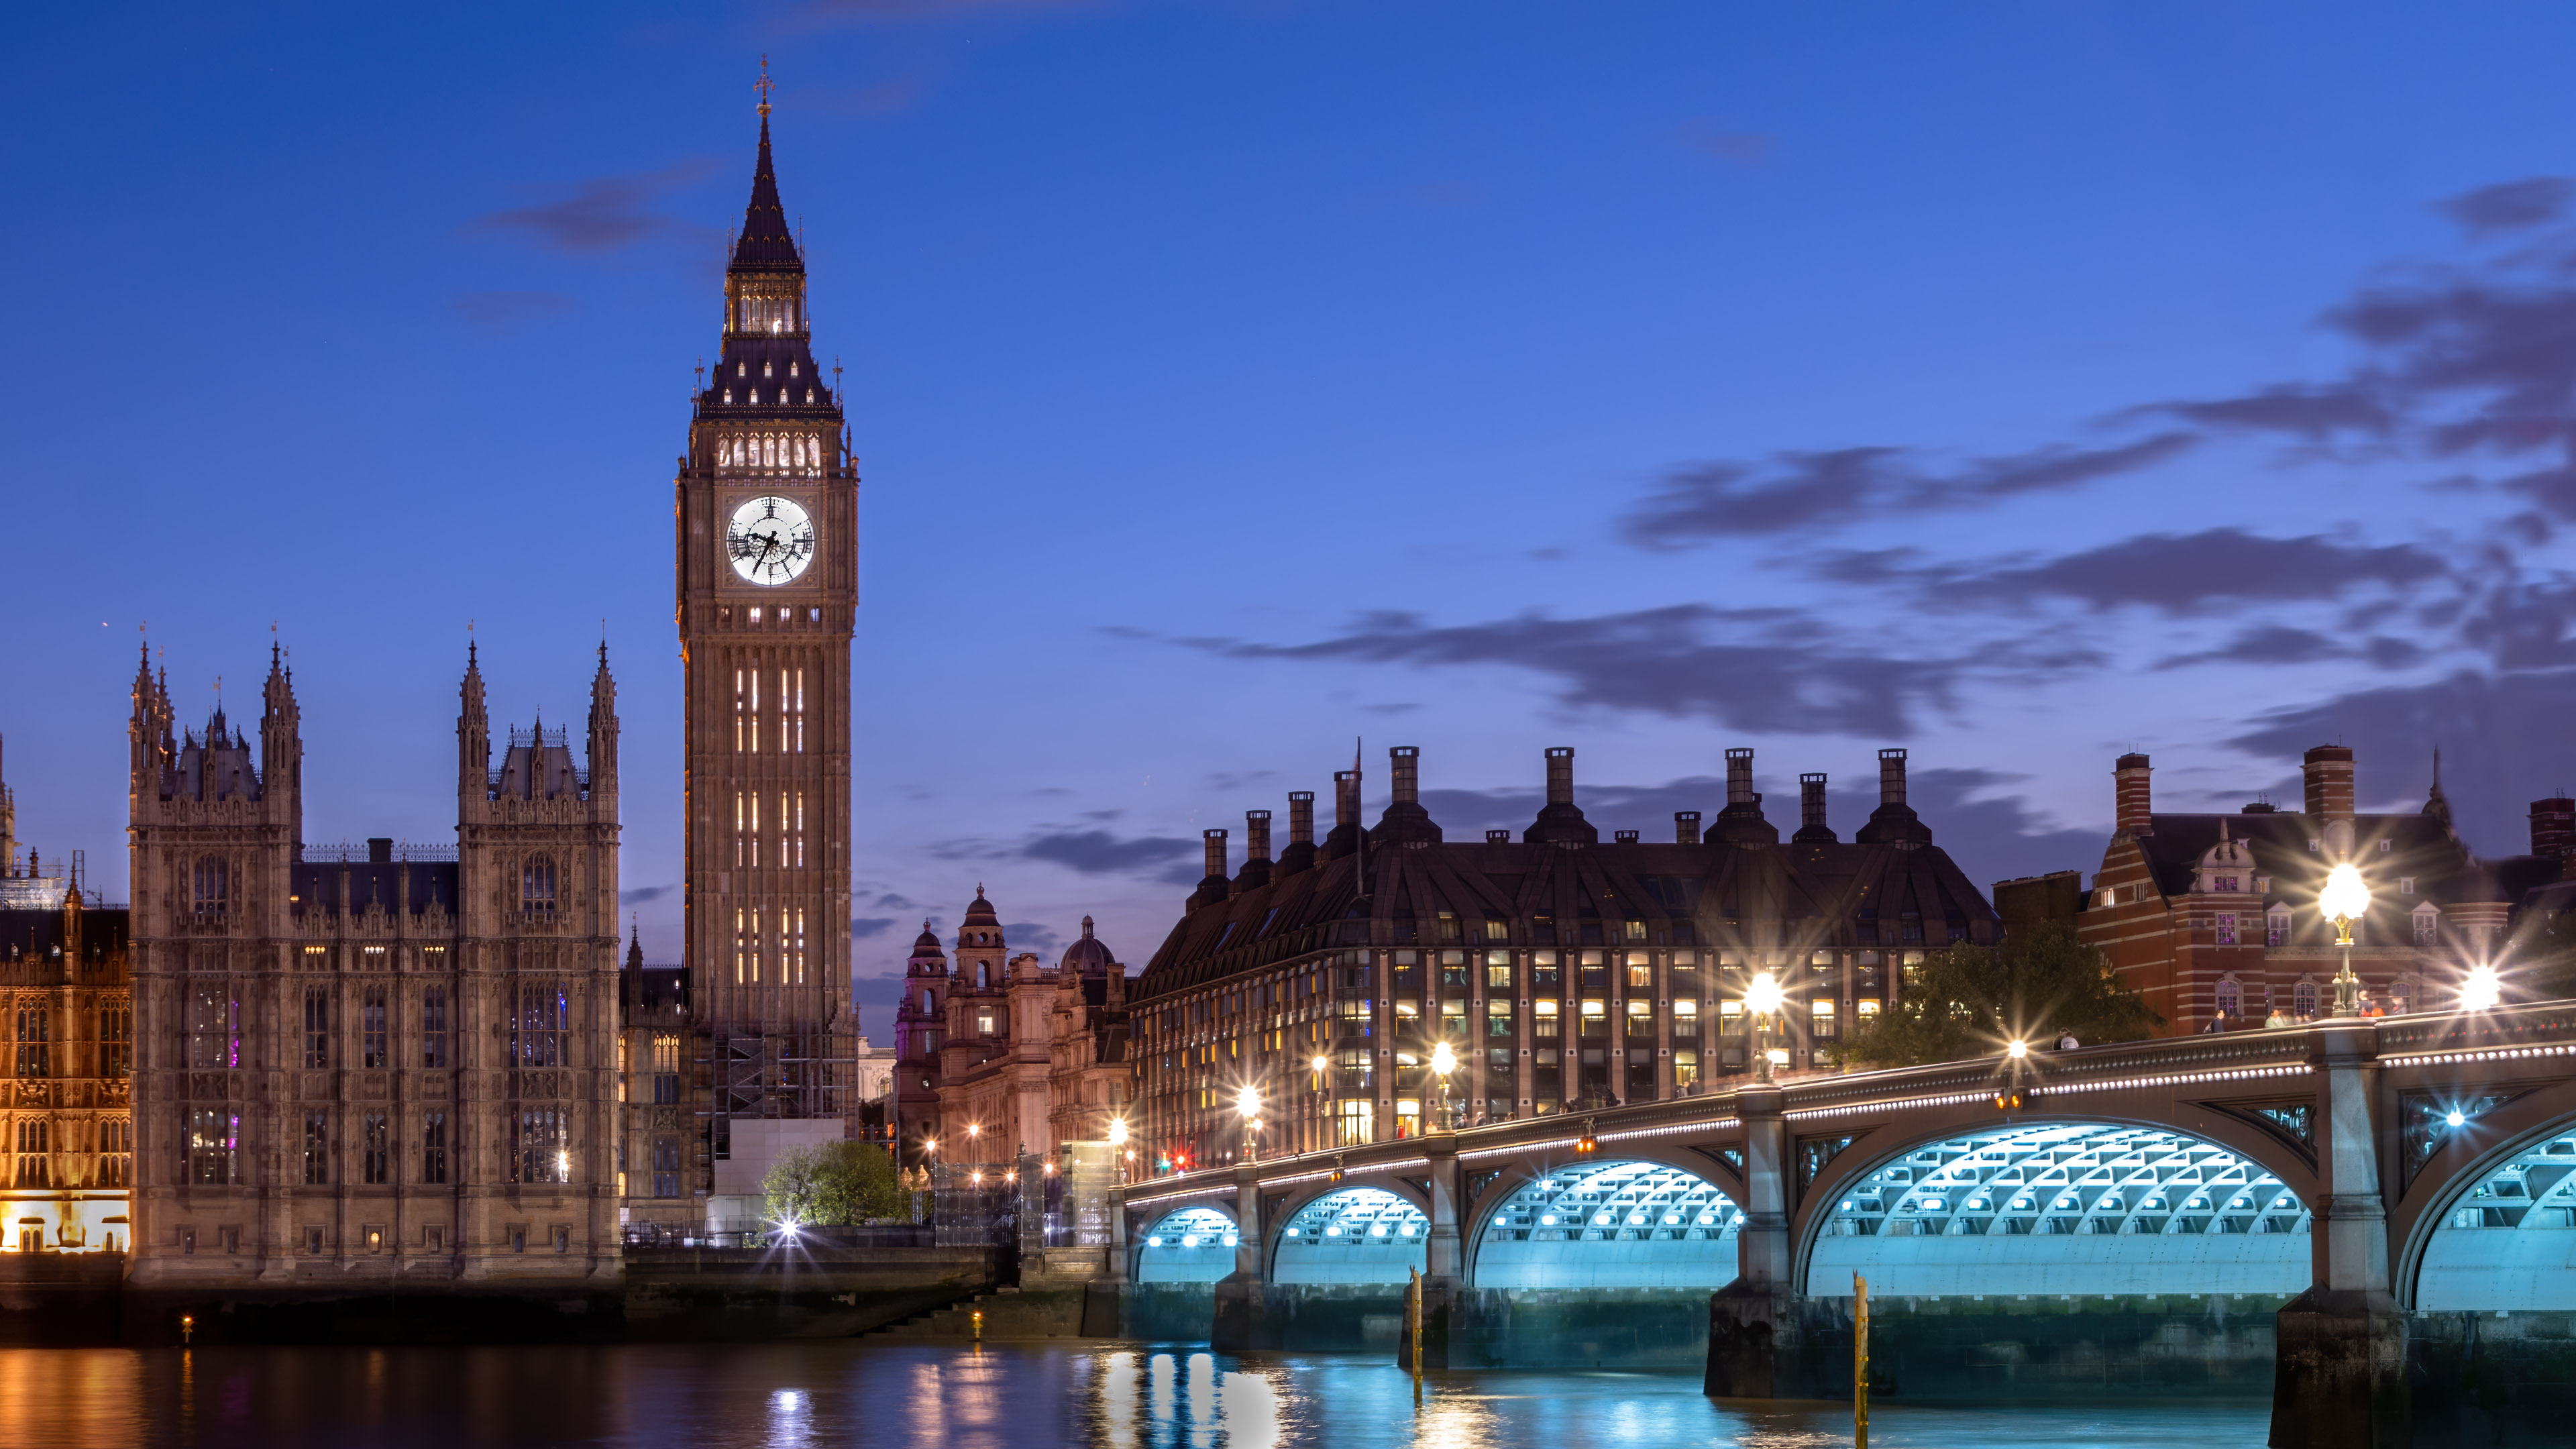 Travel to the heart of London with our computer wallpaper featuring the Westminster Bridge and Big Ben at night, bringing the city’s iconic landmarks to your desktop.